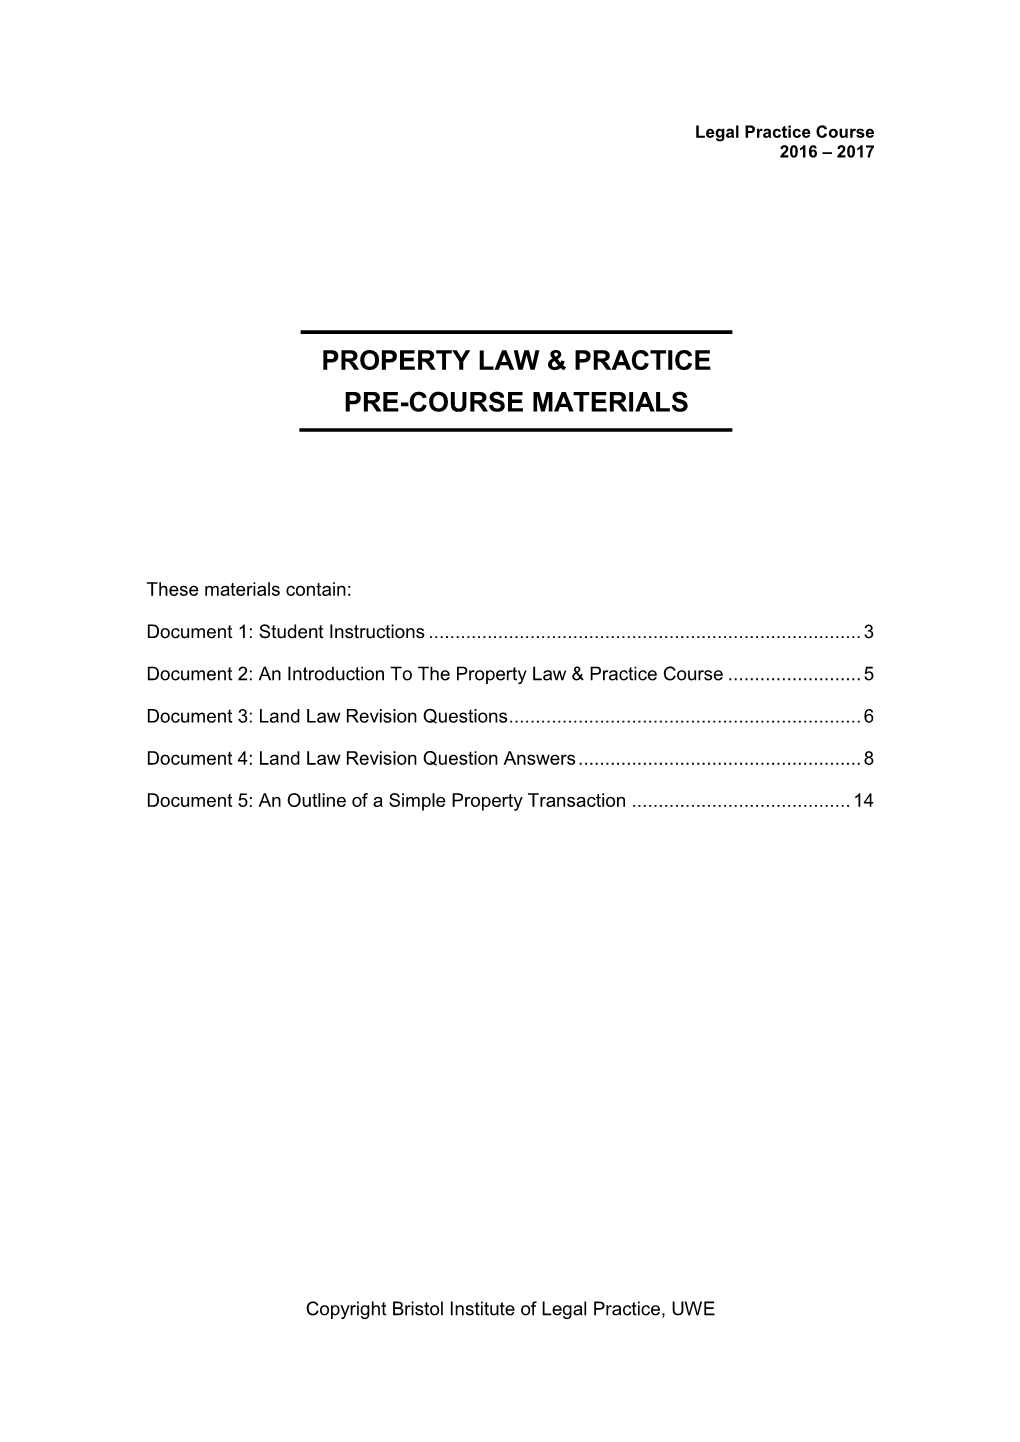 Property Law & Practice Pre-Course Materials